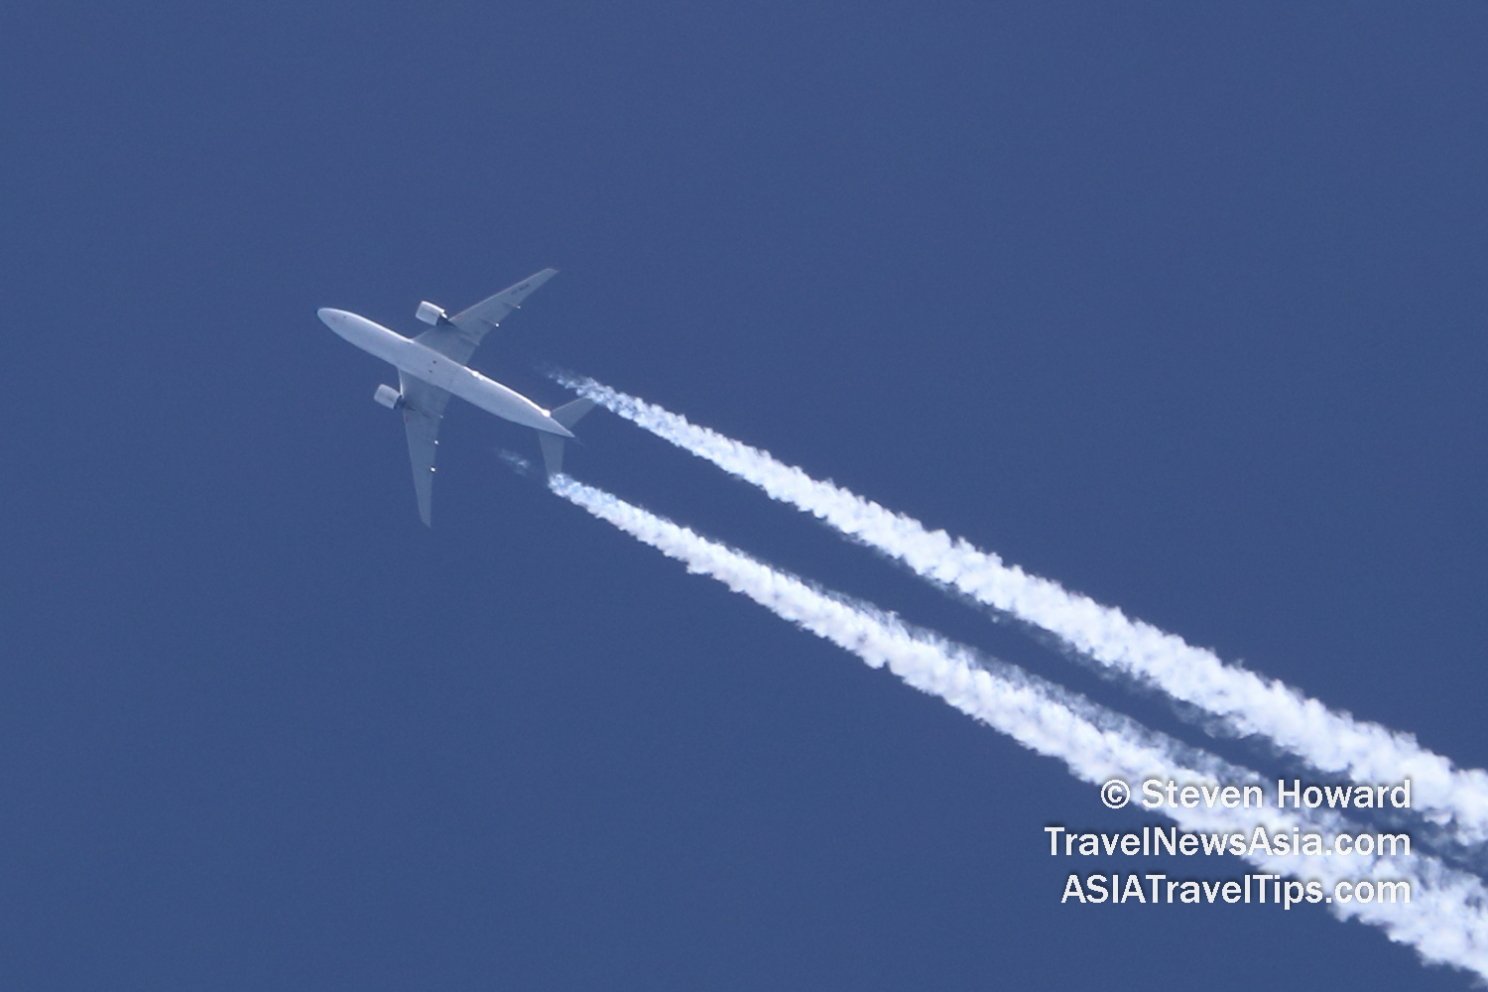 Aircraft flying overhead with visible contrails. Picture by Steven Howard of TravelNewsAsia.com Click to enlarge.